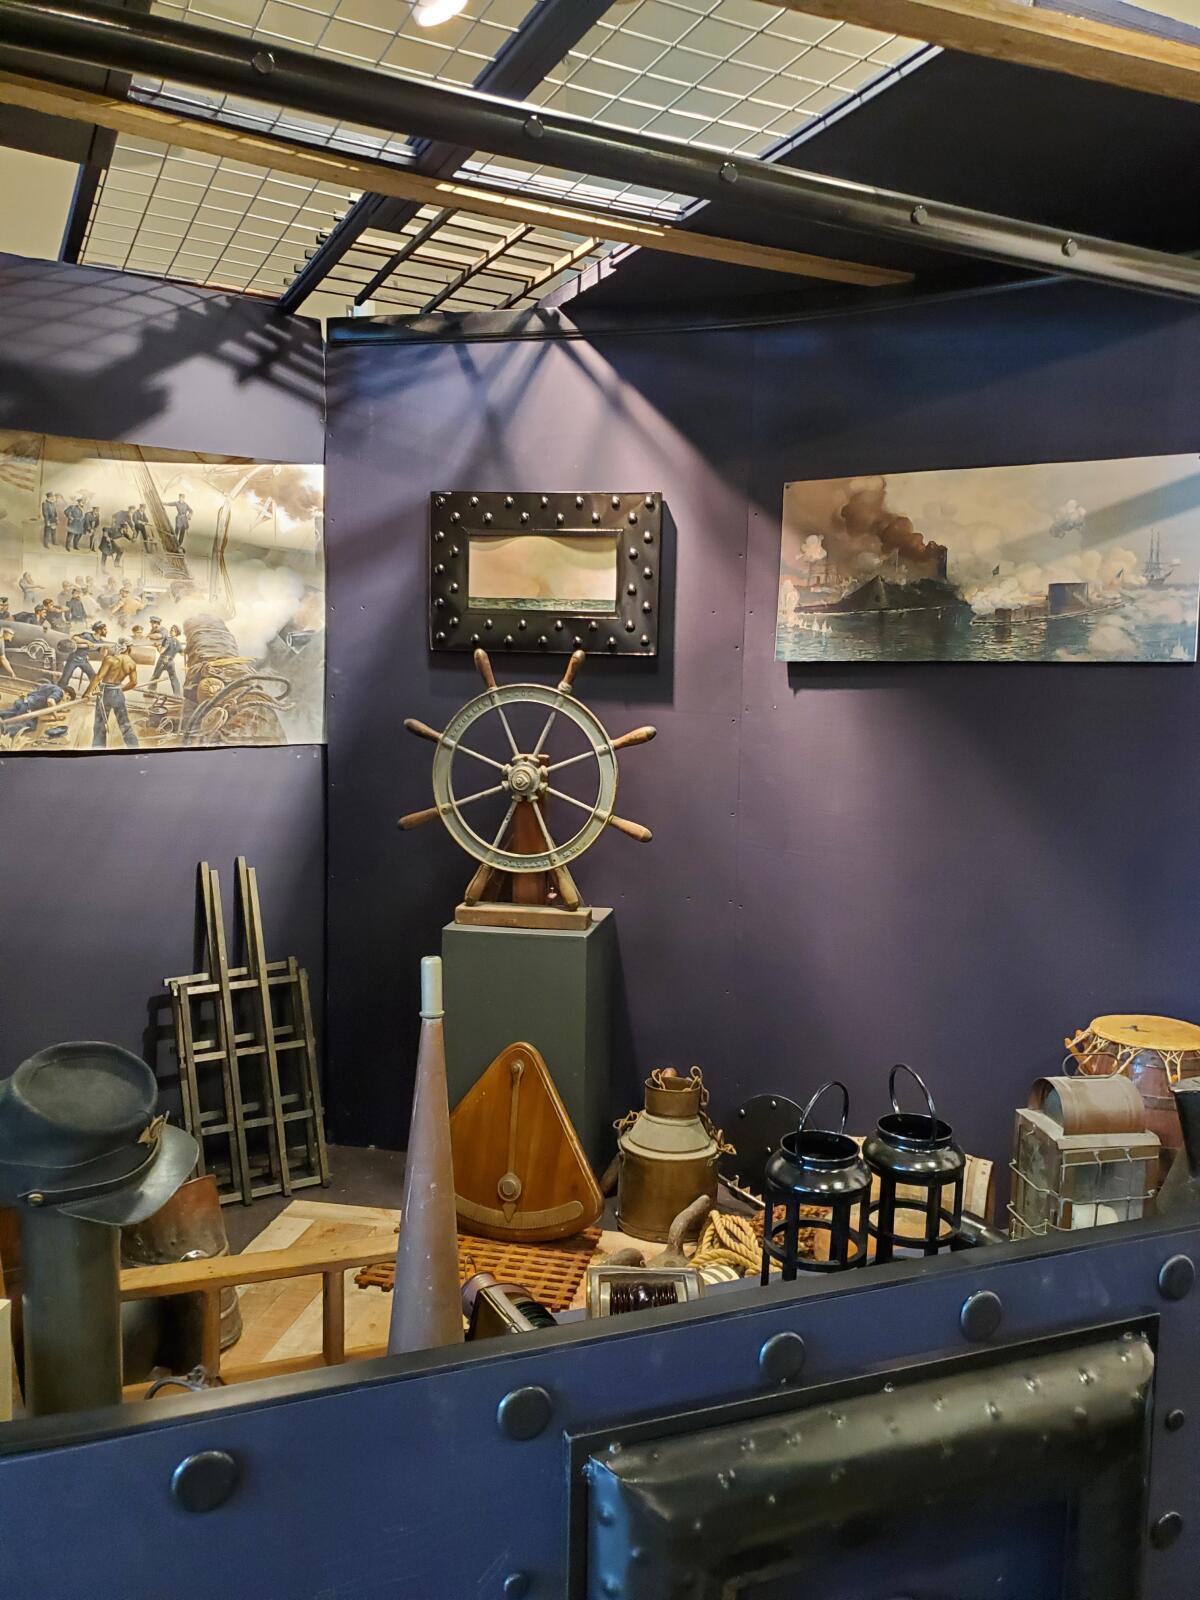 The in-development Civil War ship booth will be part of the "Permission to Come Aboard" exhibition.